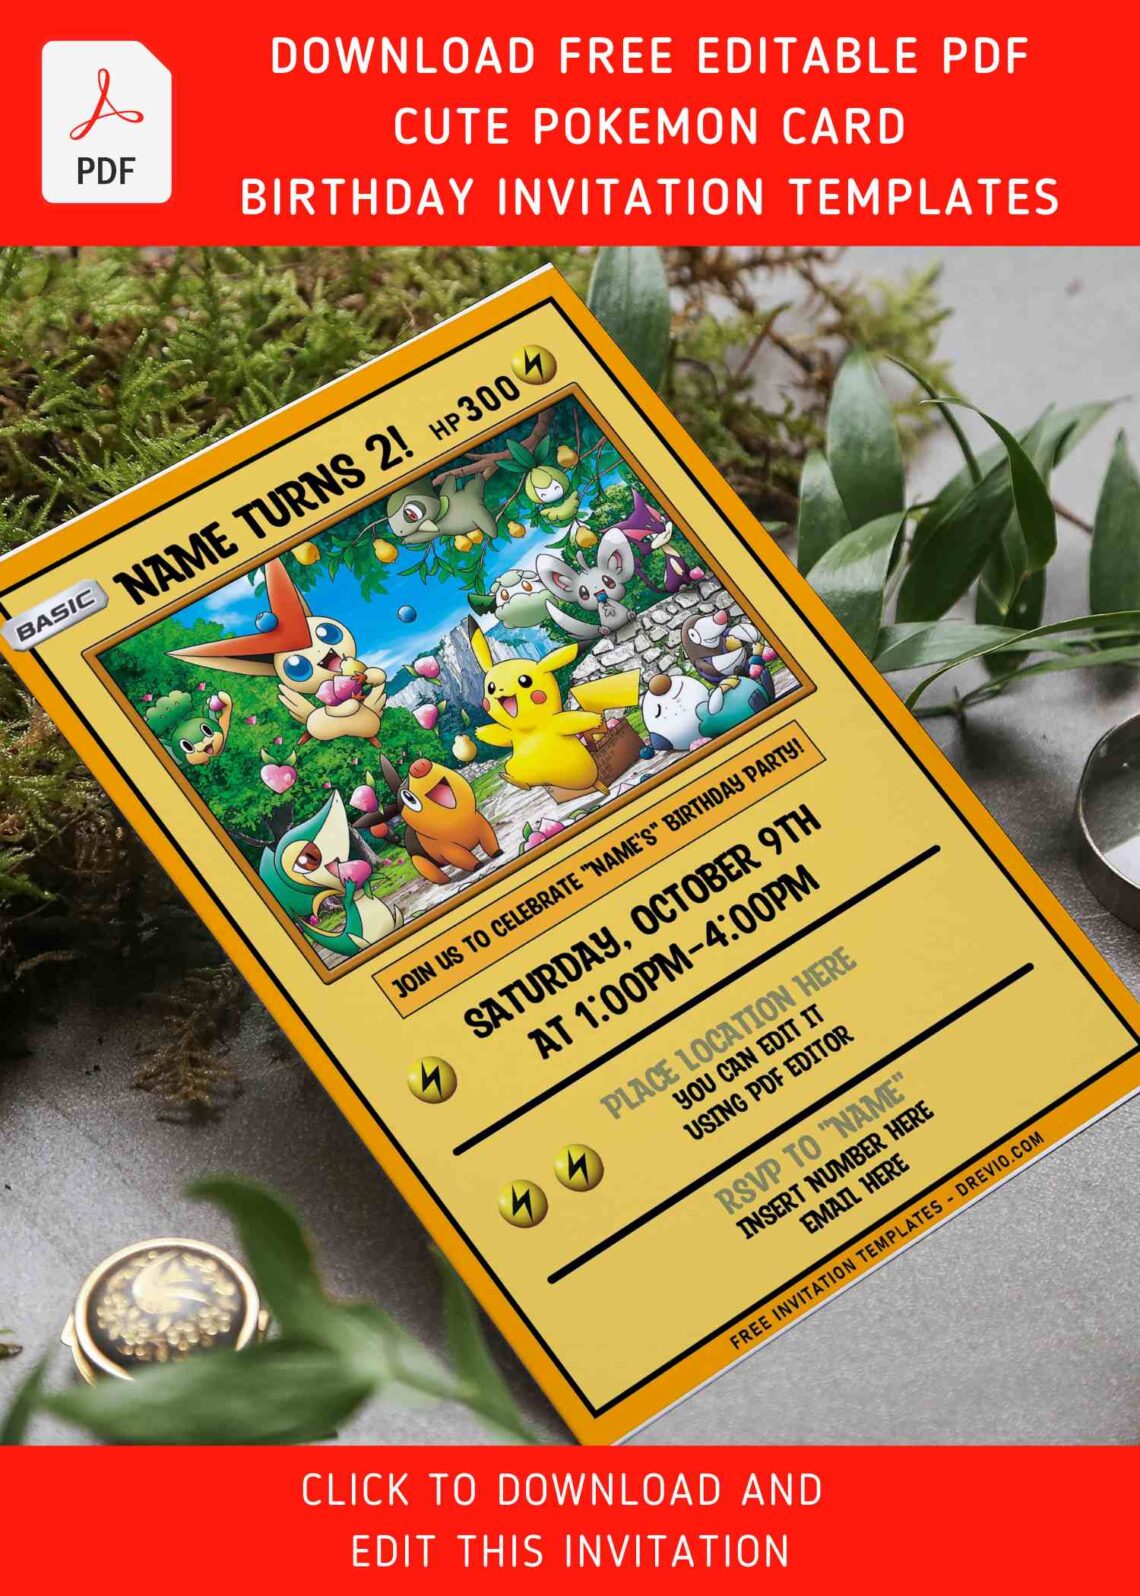 (Free Editable PDF) Cute And Awesome Pokemon Kids Birthday Party Invitation Templates with Ash and Pikachu